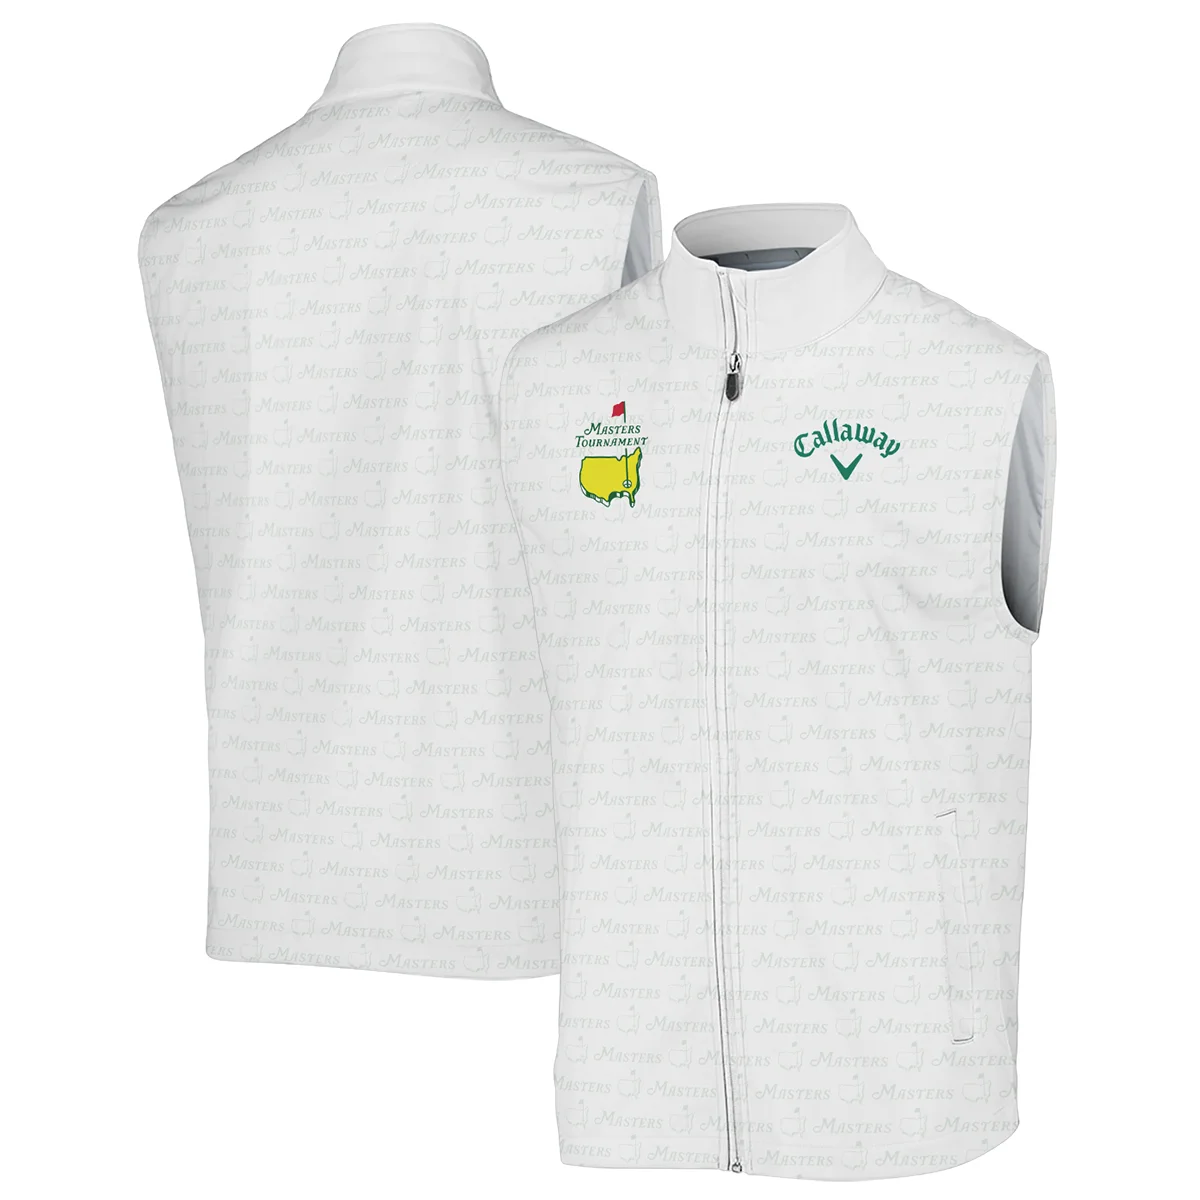 Golf Pattern Masters Tournament Callaway Zipper Polo Shirt White And Green Color Golf Sports All Over Print Zipper Polo Shirt For Men